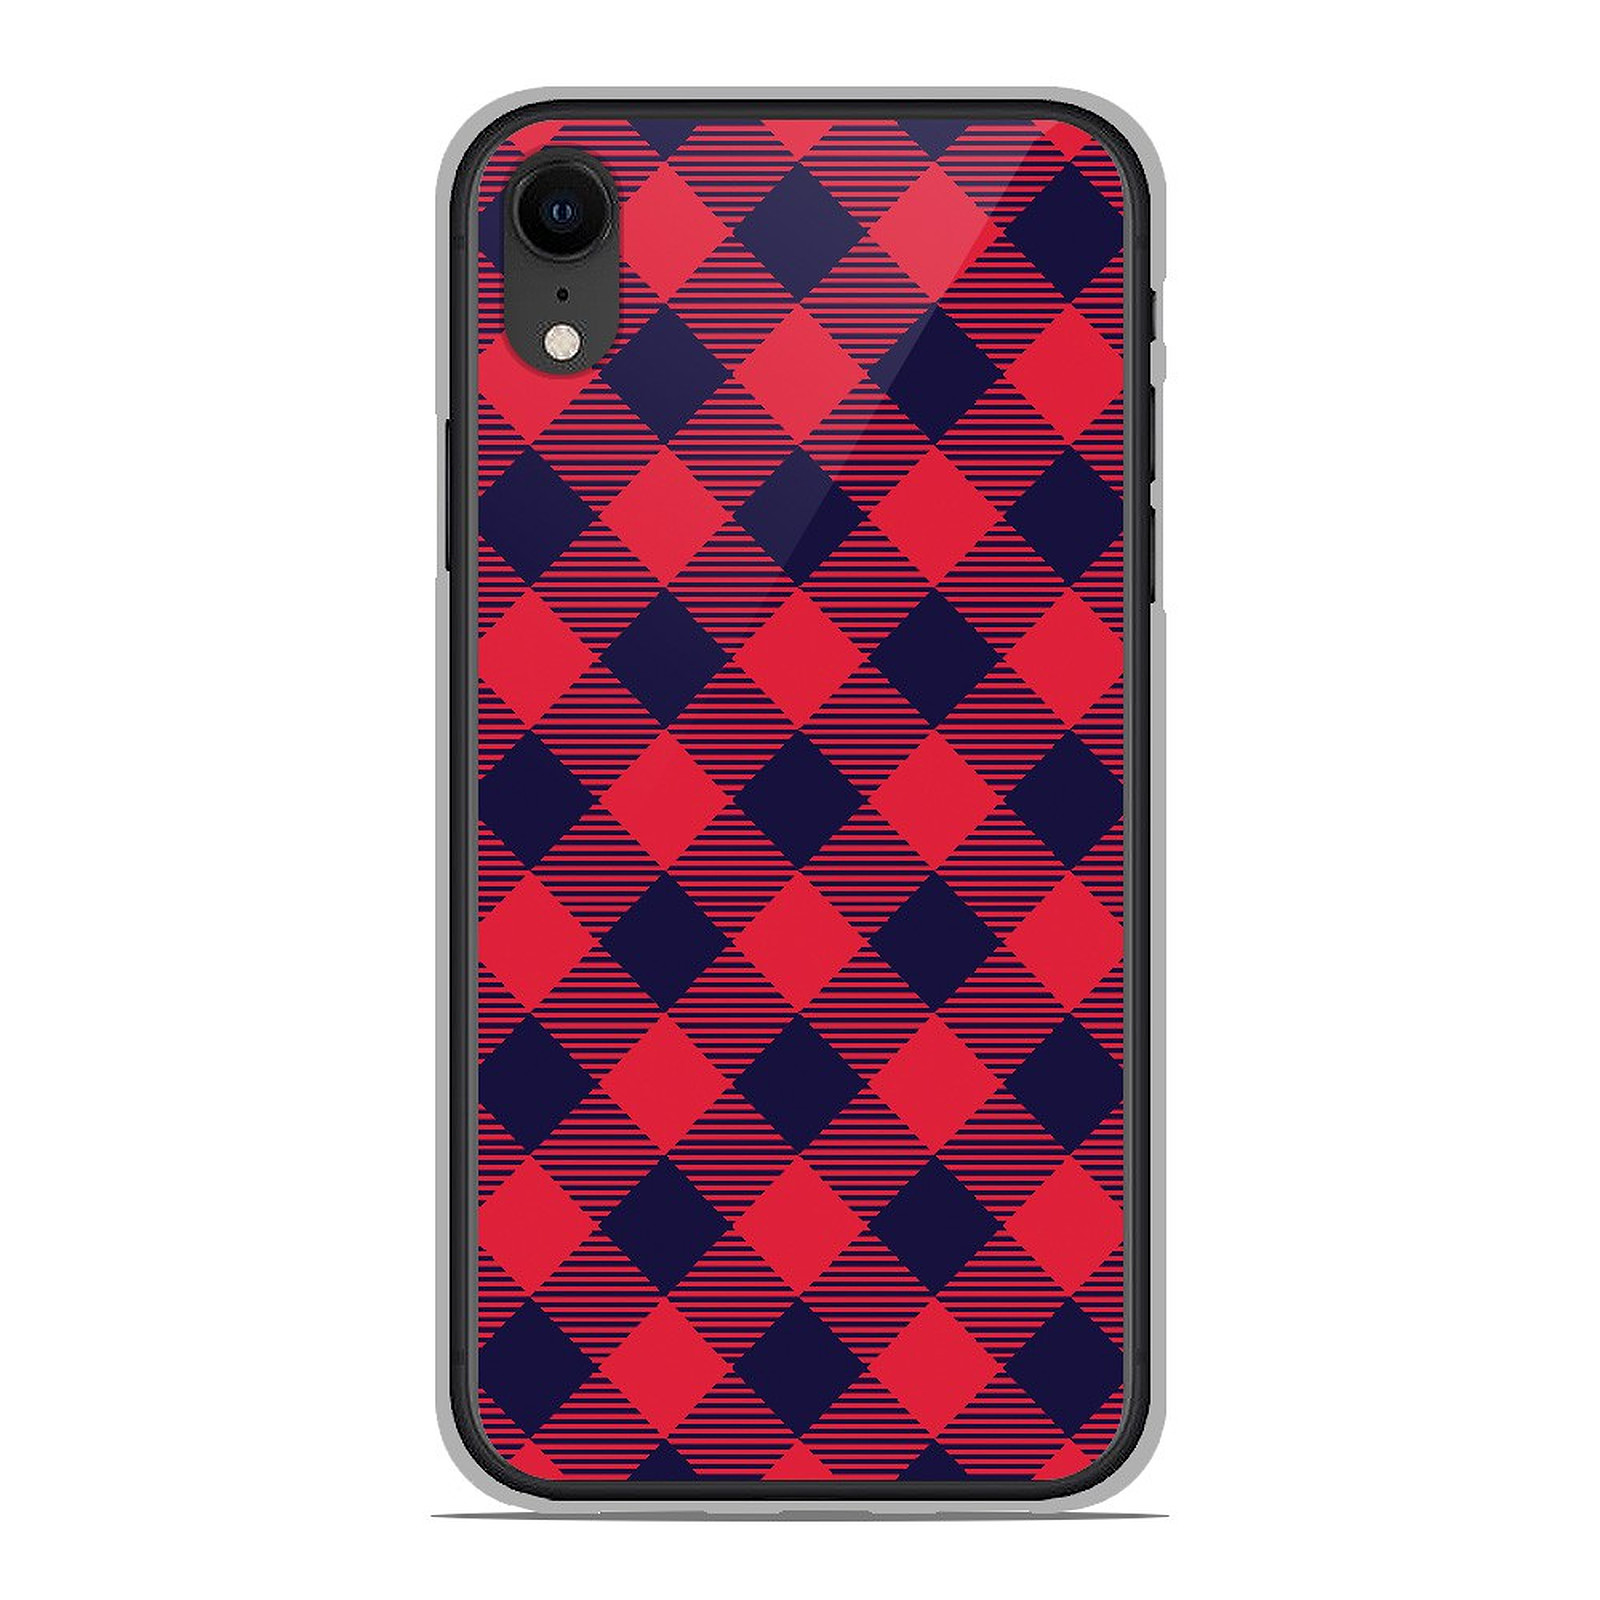 1001 Coques Coque silicone gel Apple iPhone XR motif Tartan Rouge - Coque telephone 1001Coques